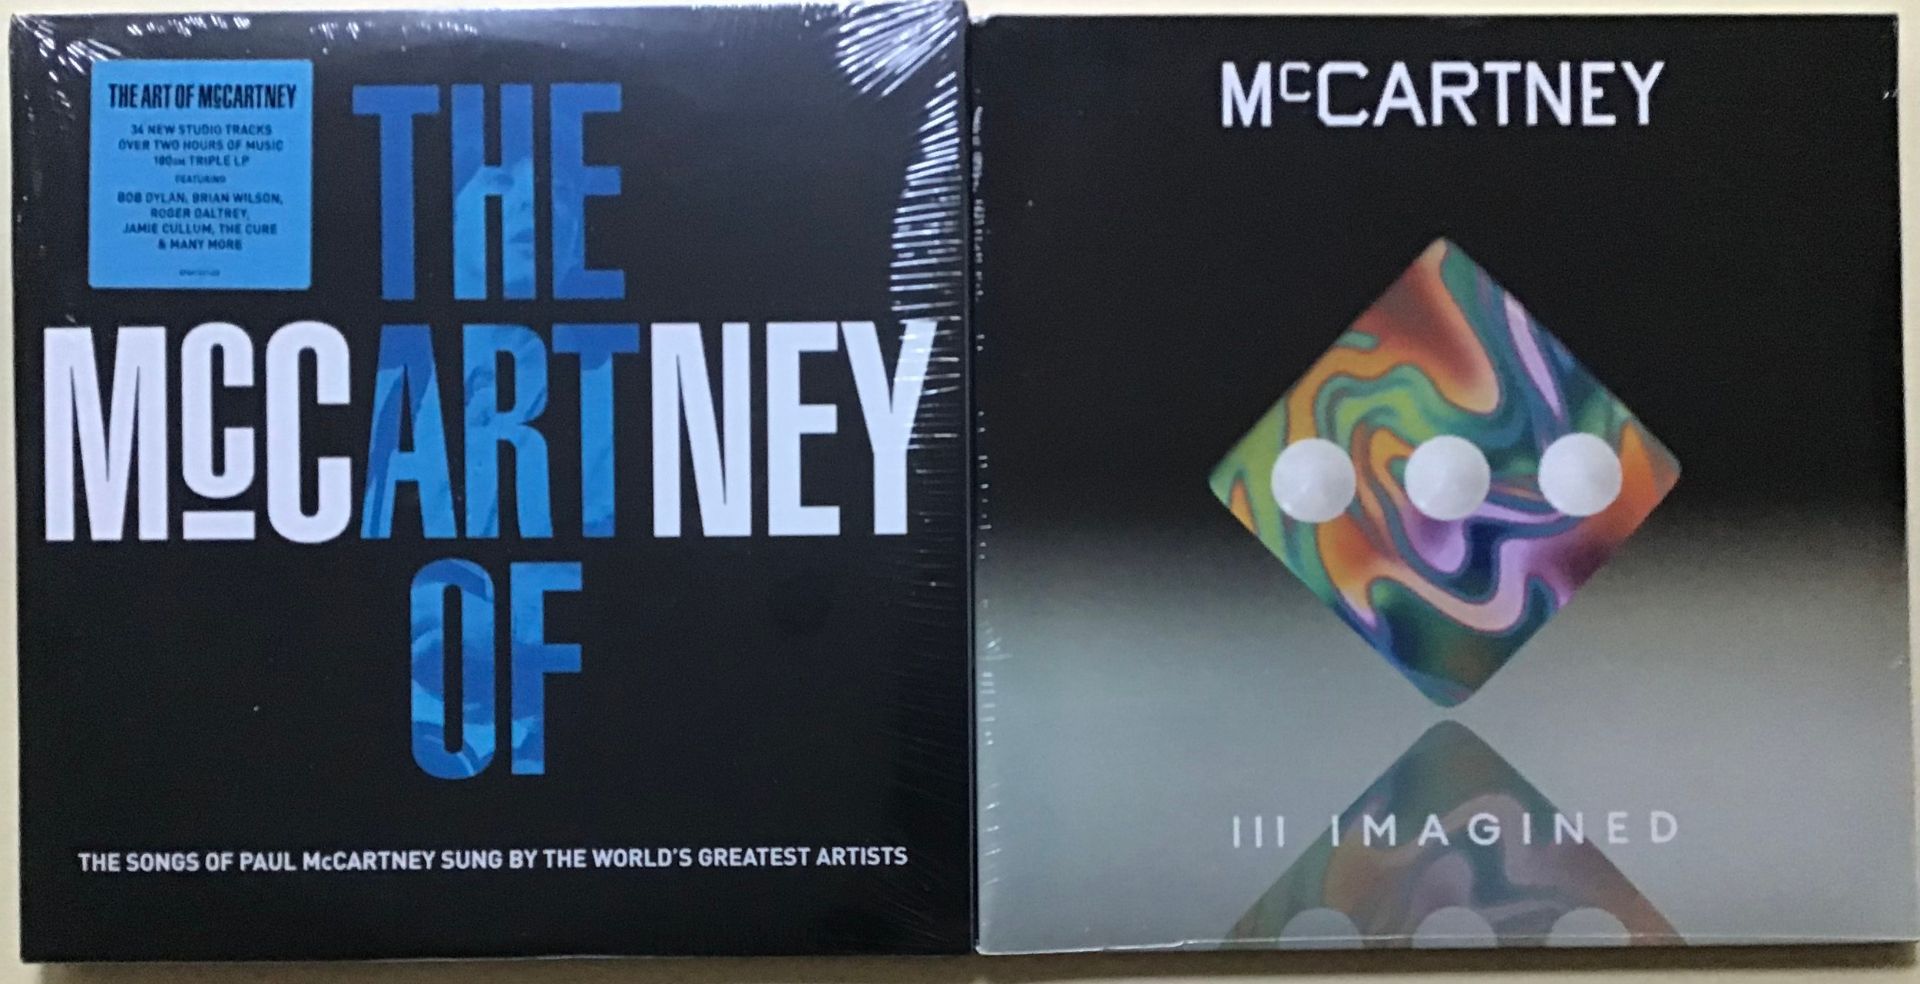 2 x SEALED PAUL McCARTNEY RELATED LP RECORDS. First here we have a copy of his 2021 album